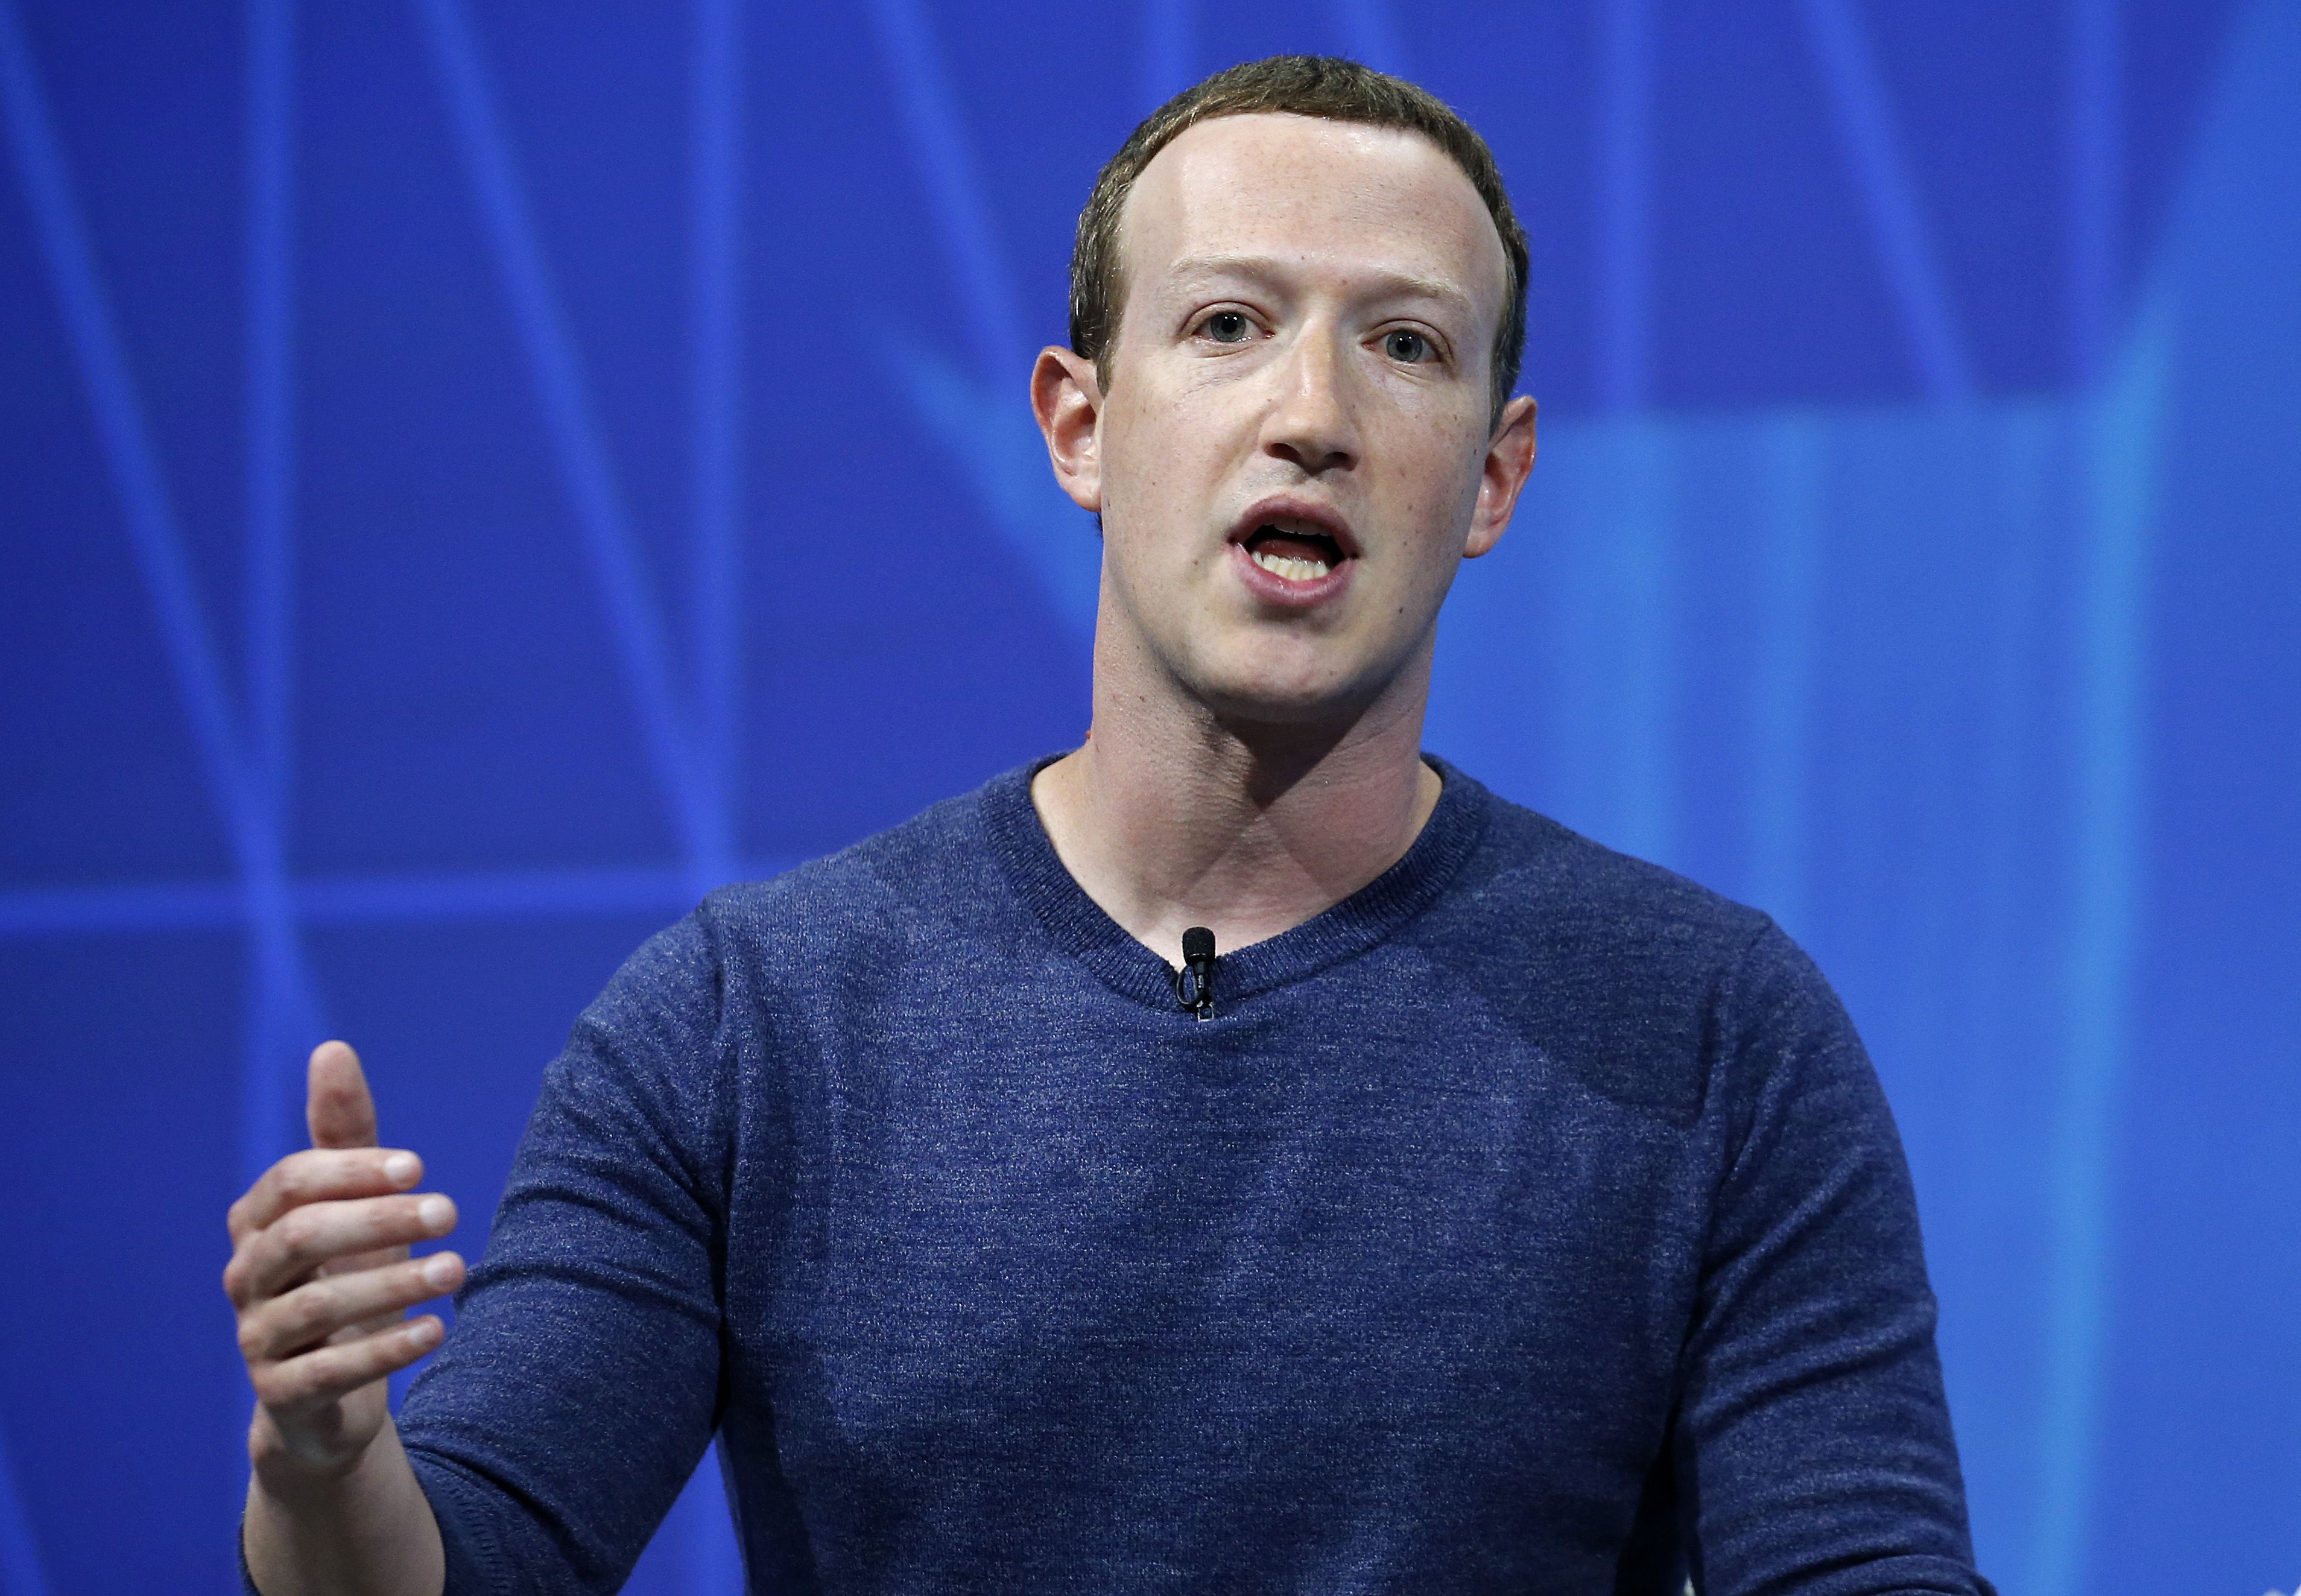 Facebook to create experimental apps under new group